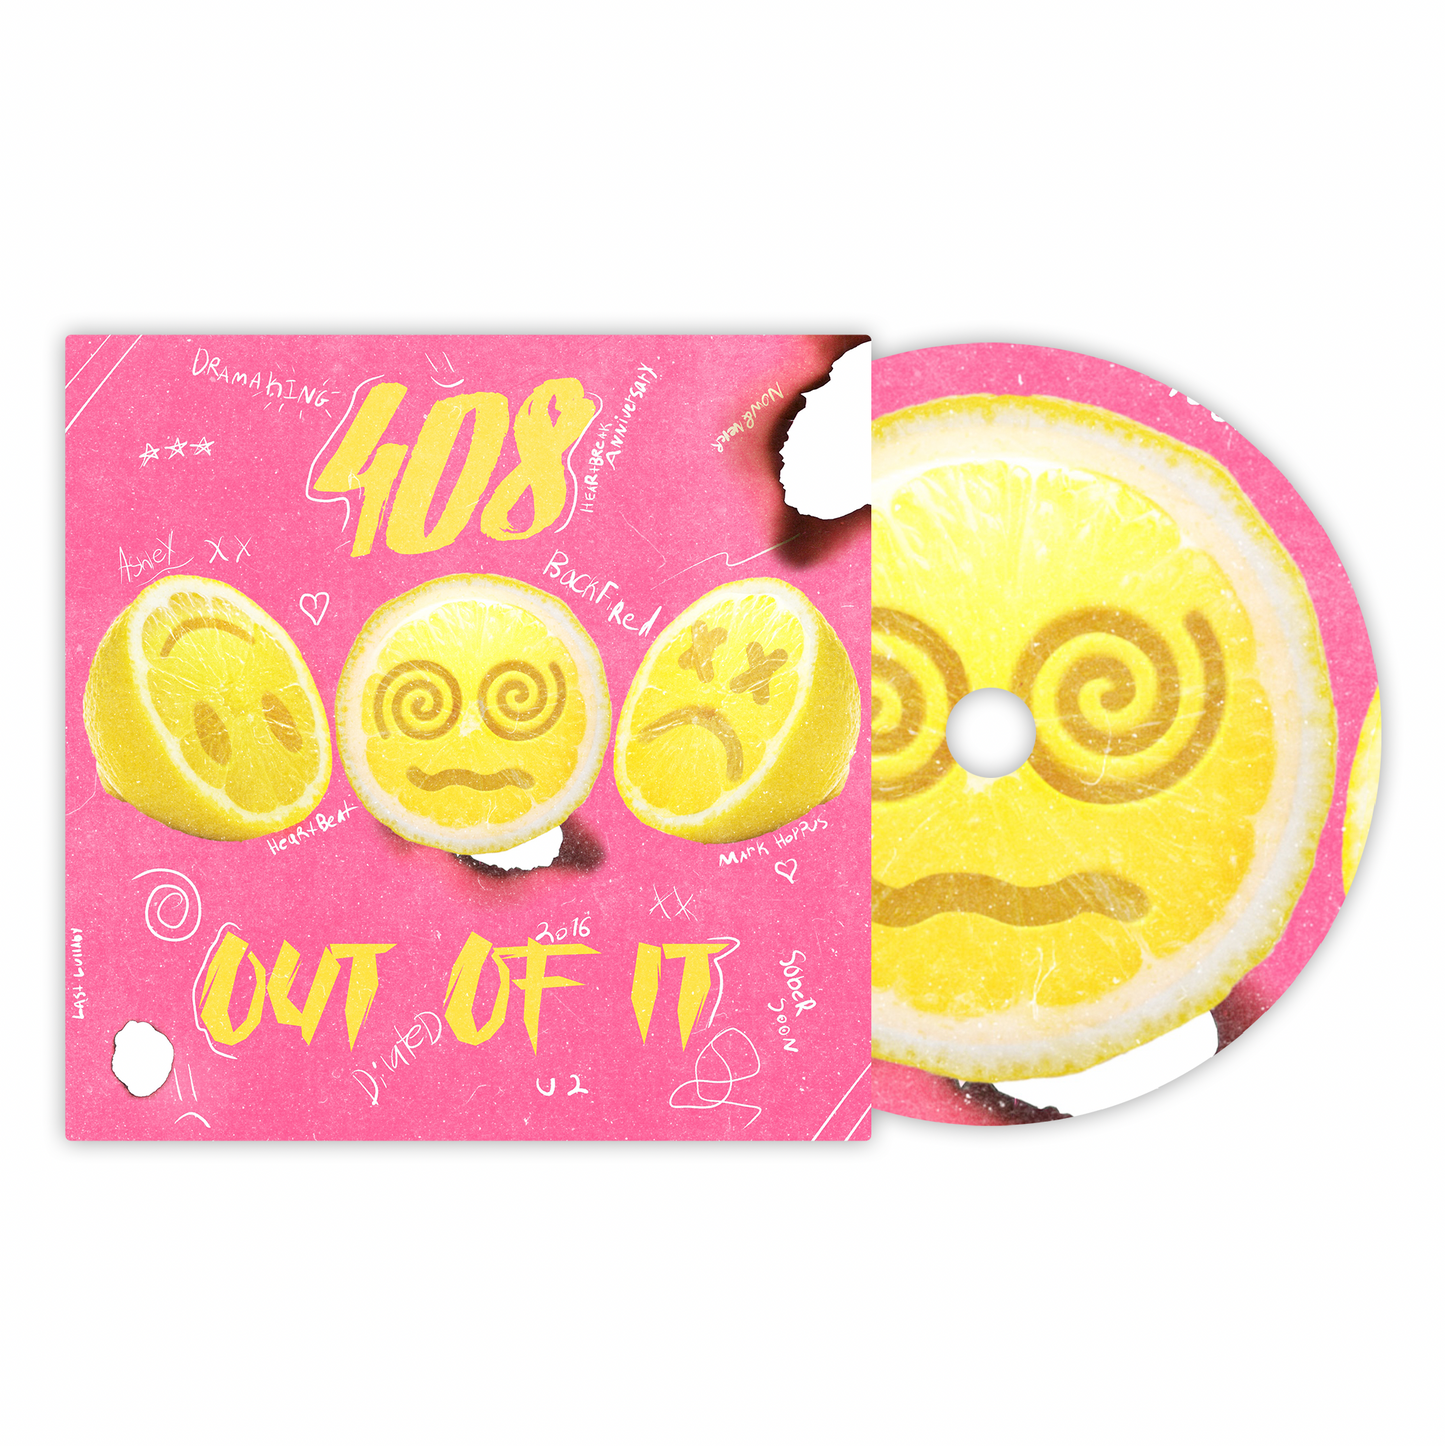 408 - Out Of It Autographed CD